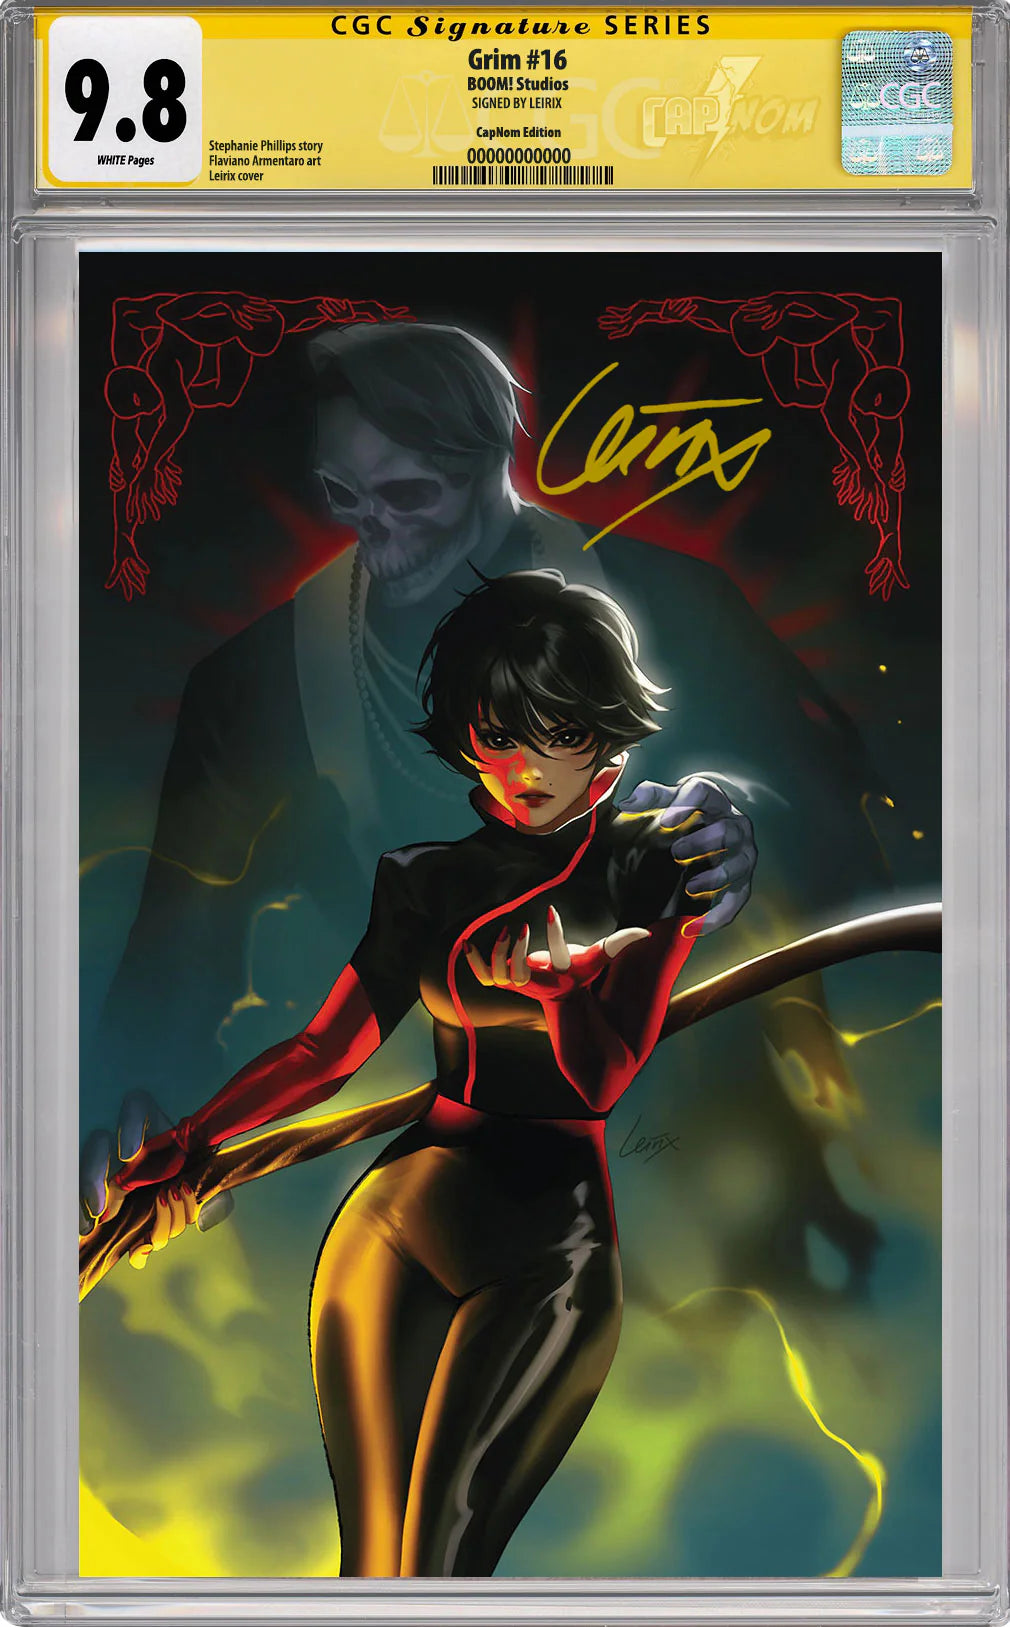 
                  
                    GRIM #16 “THE DEATH TOUCH” C2E2 EXCLUSIVE BY LEIRIX
                  
                